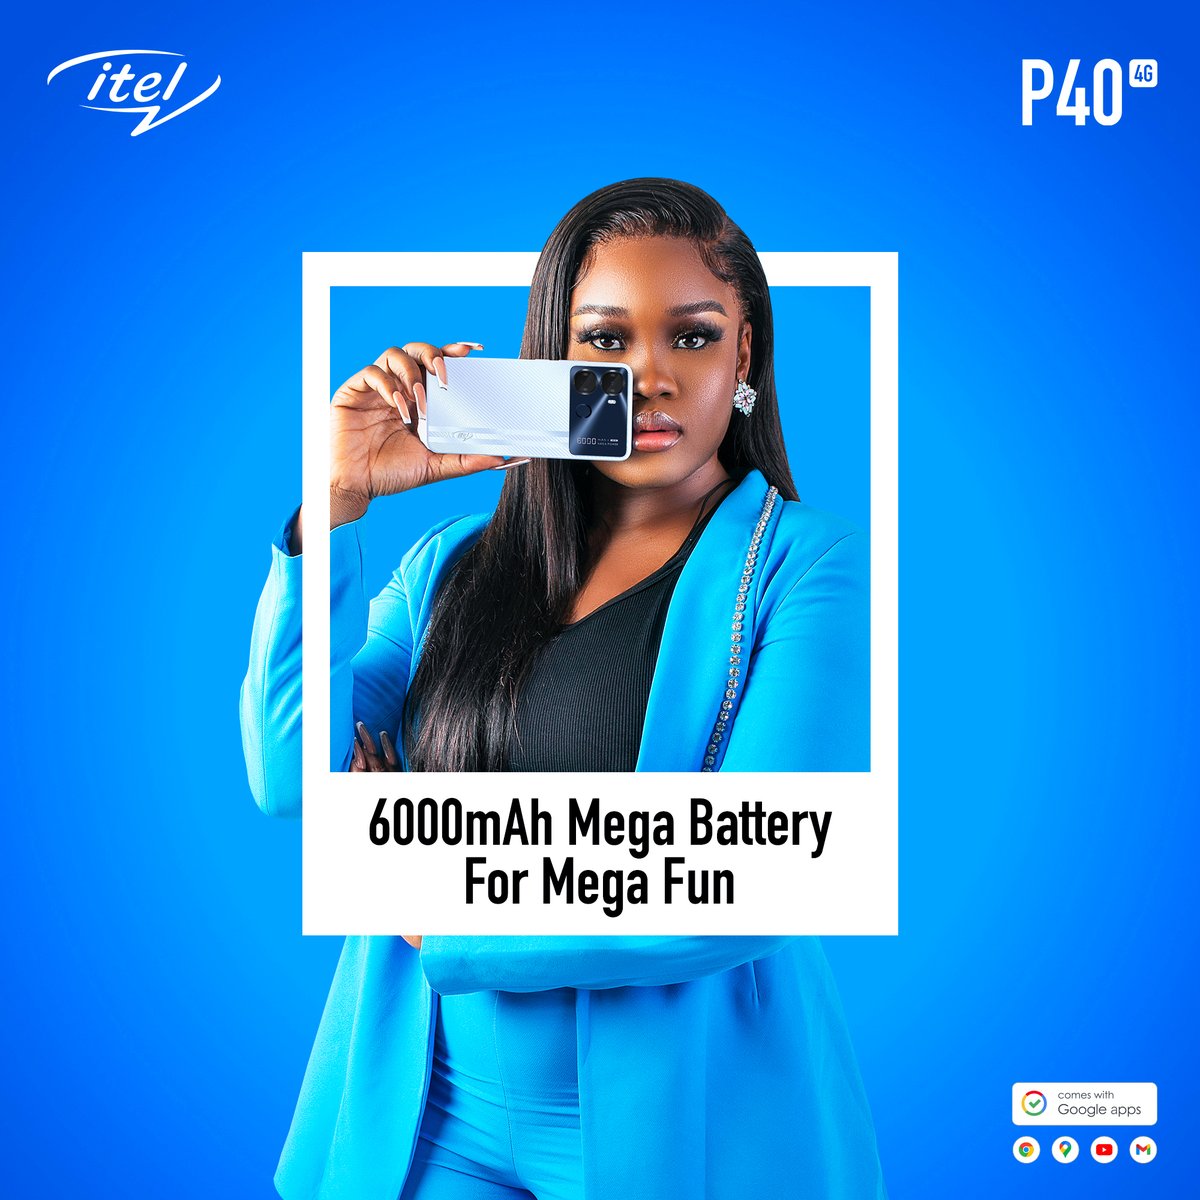 Get your hands on the incredible itel P40 now like @Official_CeeC! Purchase your very own 6000mAh mega battery smartphone for just 59,900 in itel authorized stores near you or on Jumia today! 

#itelP40
#1ChargeFor3Days